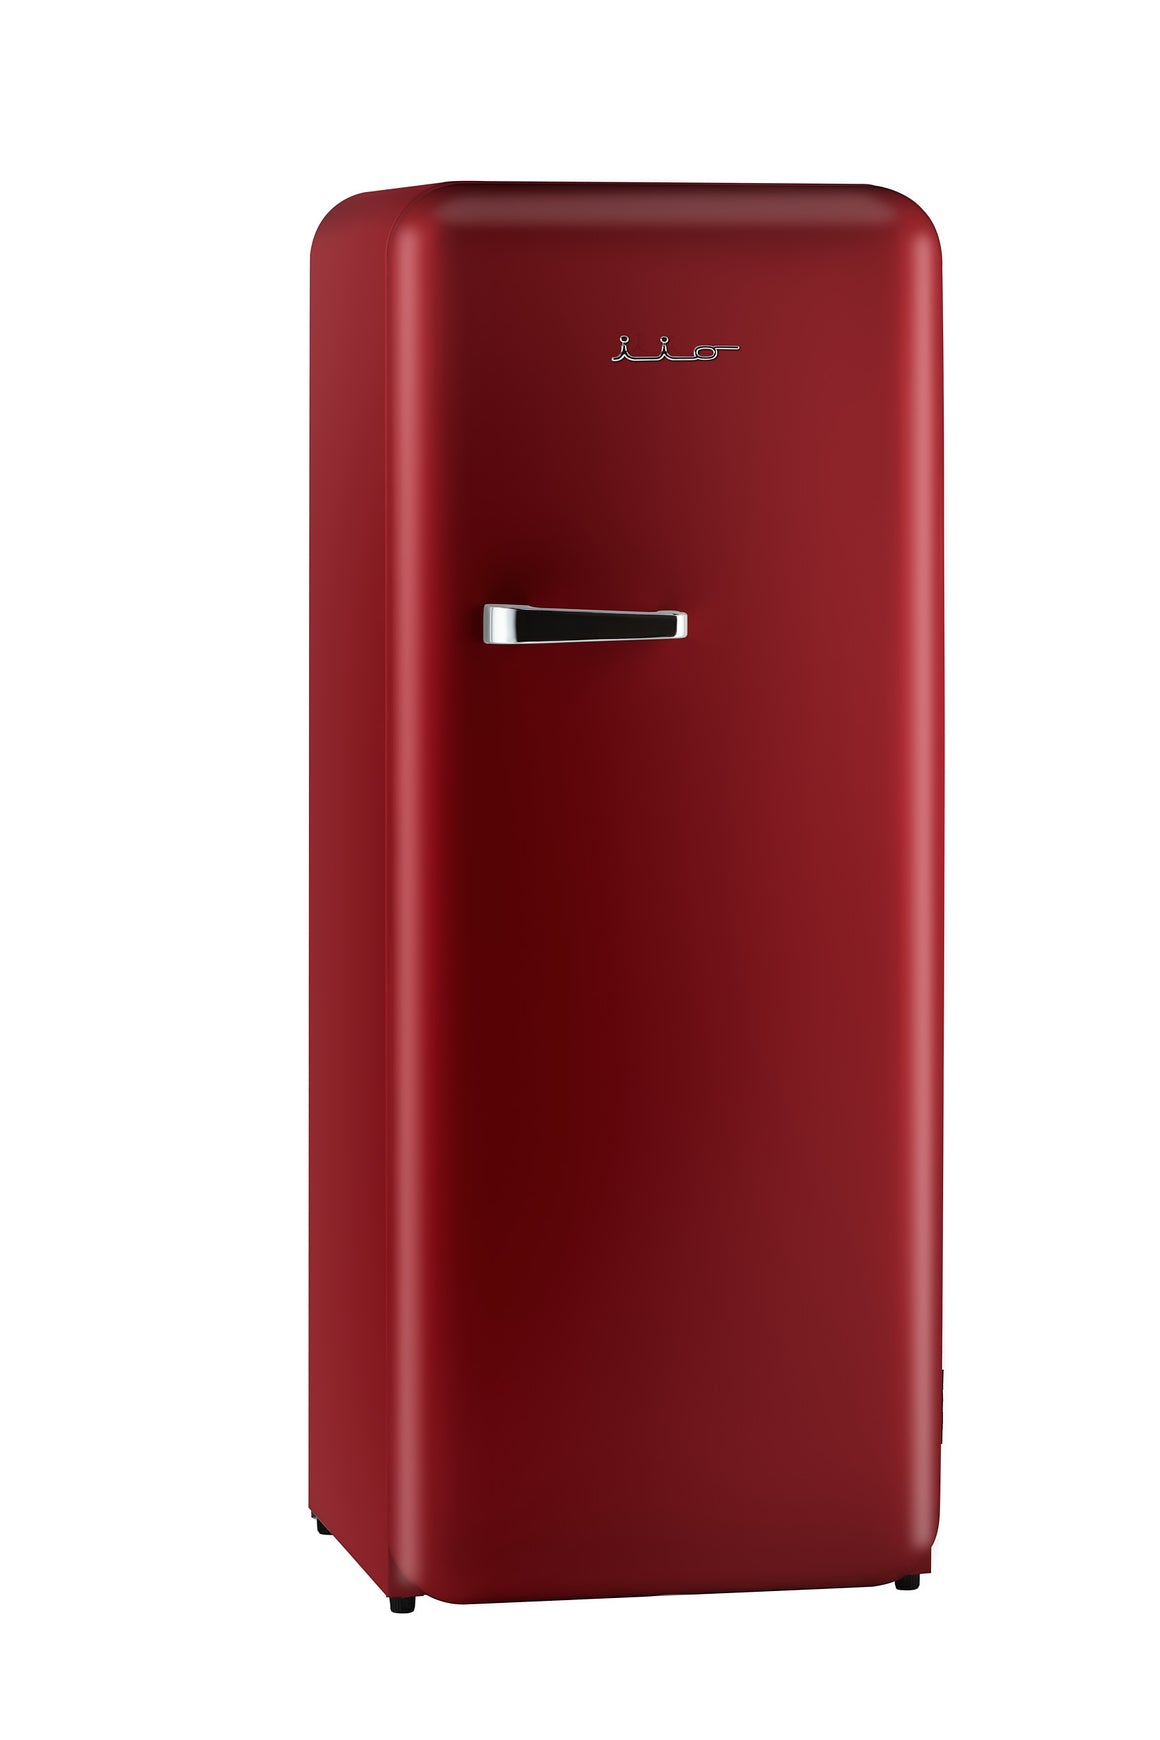 iio 10 Cu. Ft. Retro Refrigerator with Freezerette in Ruby Red